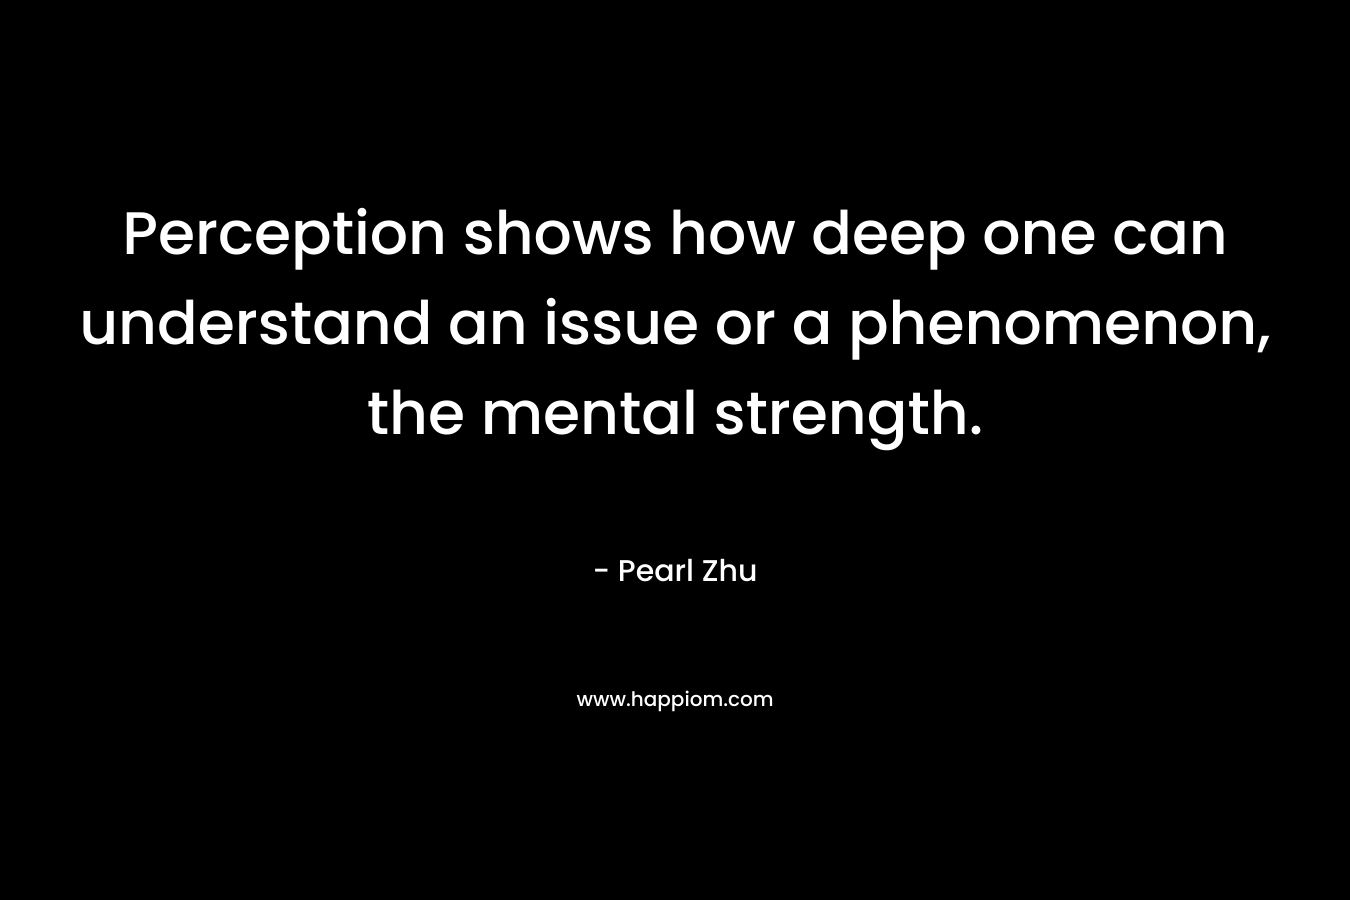 Perception shows how deep one can understand an issue or a phenomenon, the mental strength.